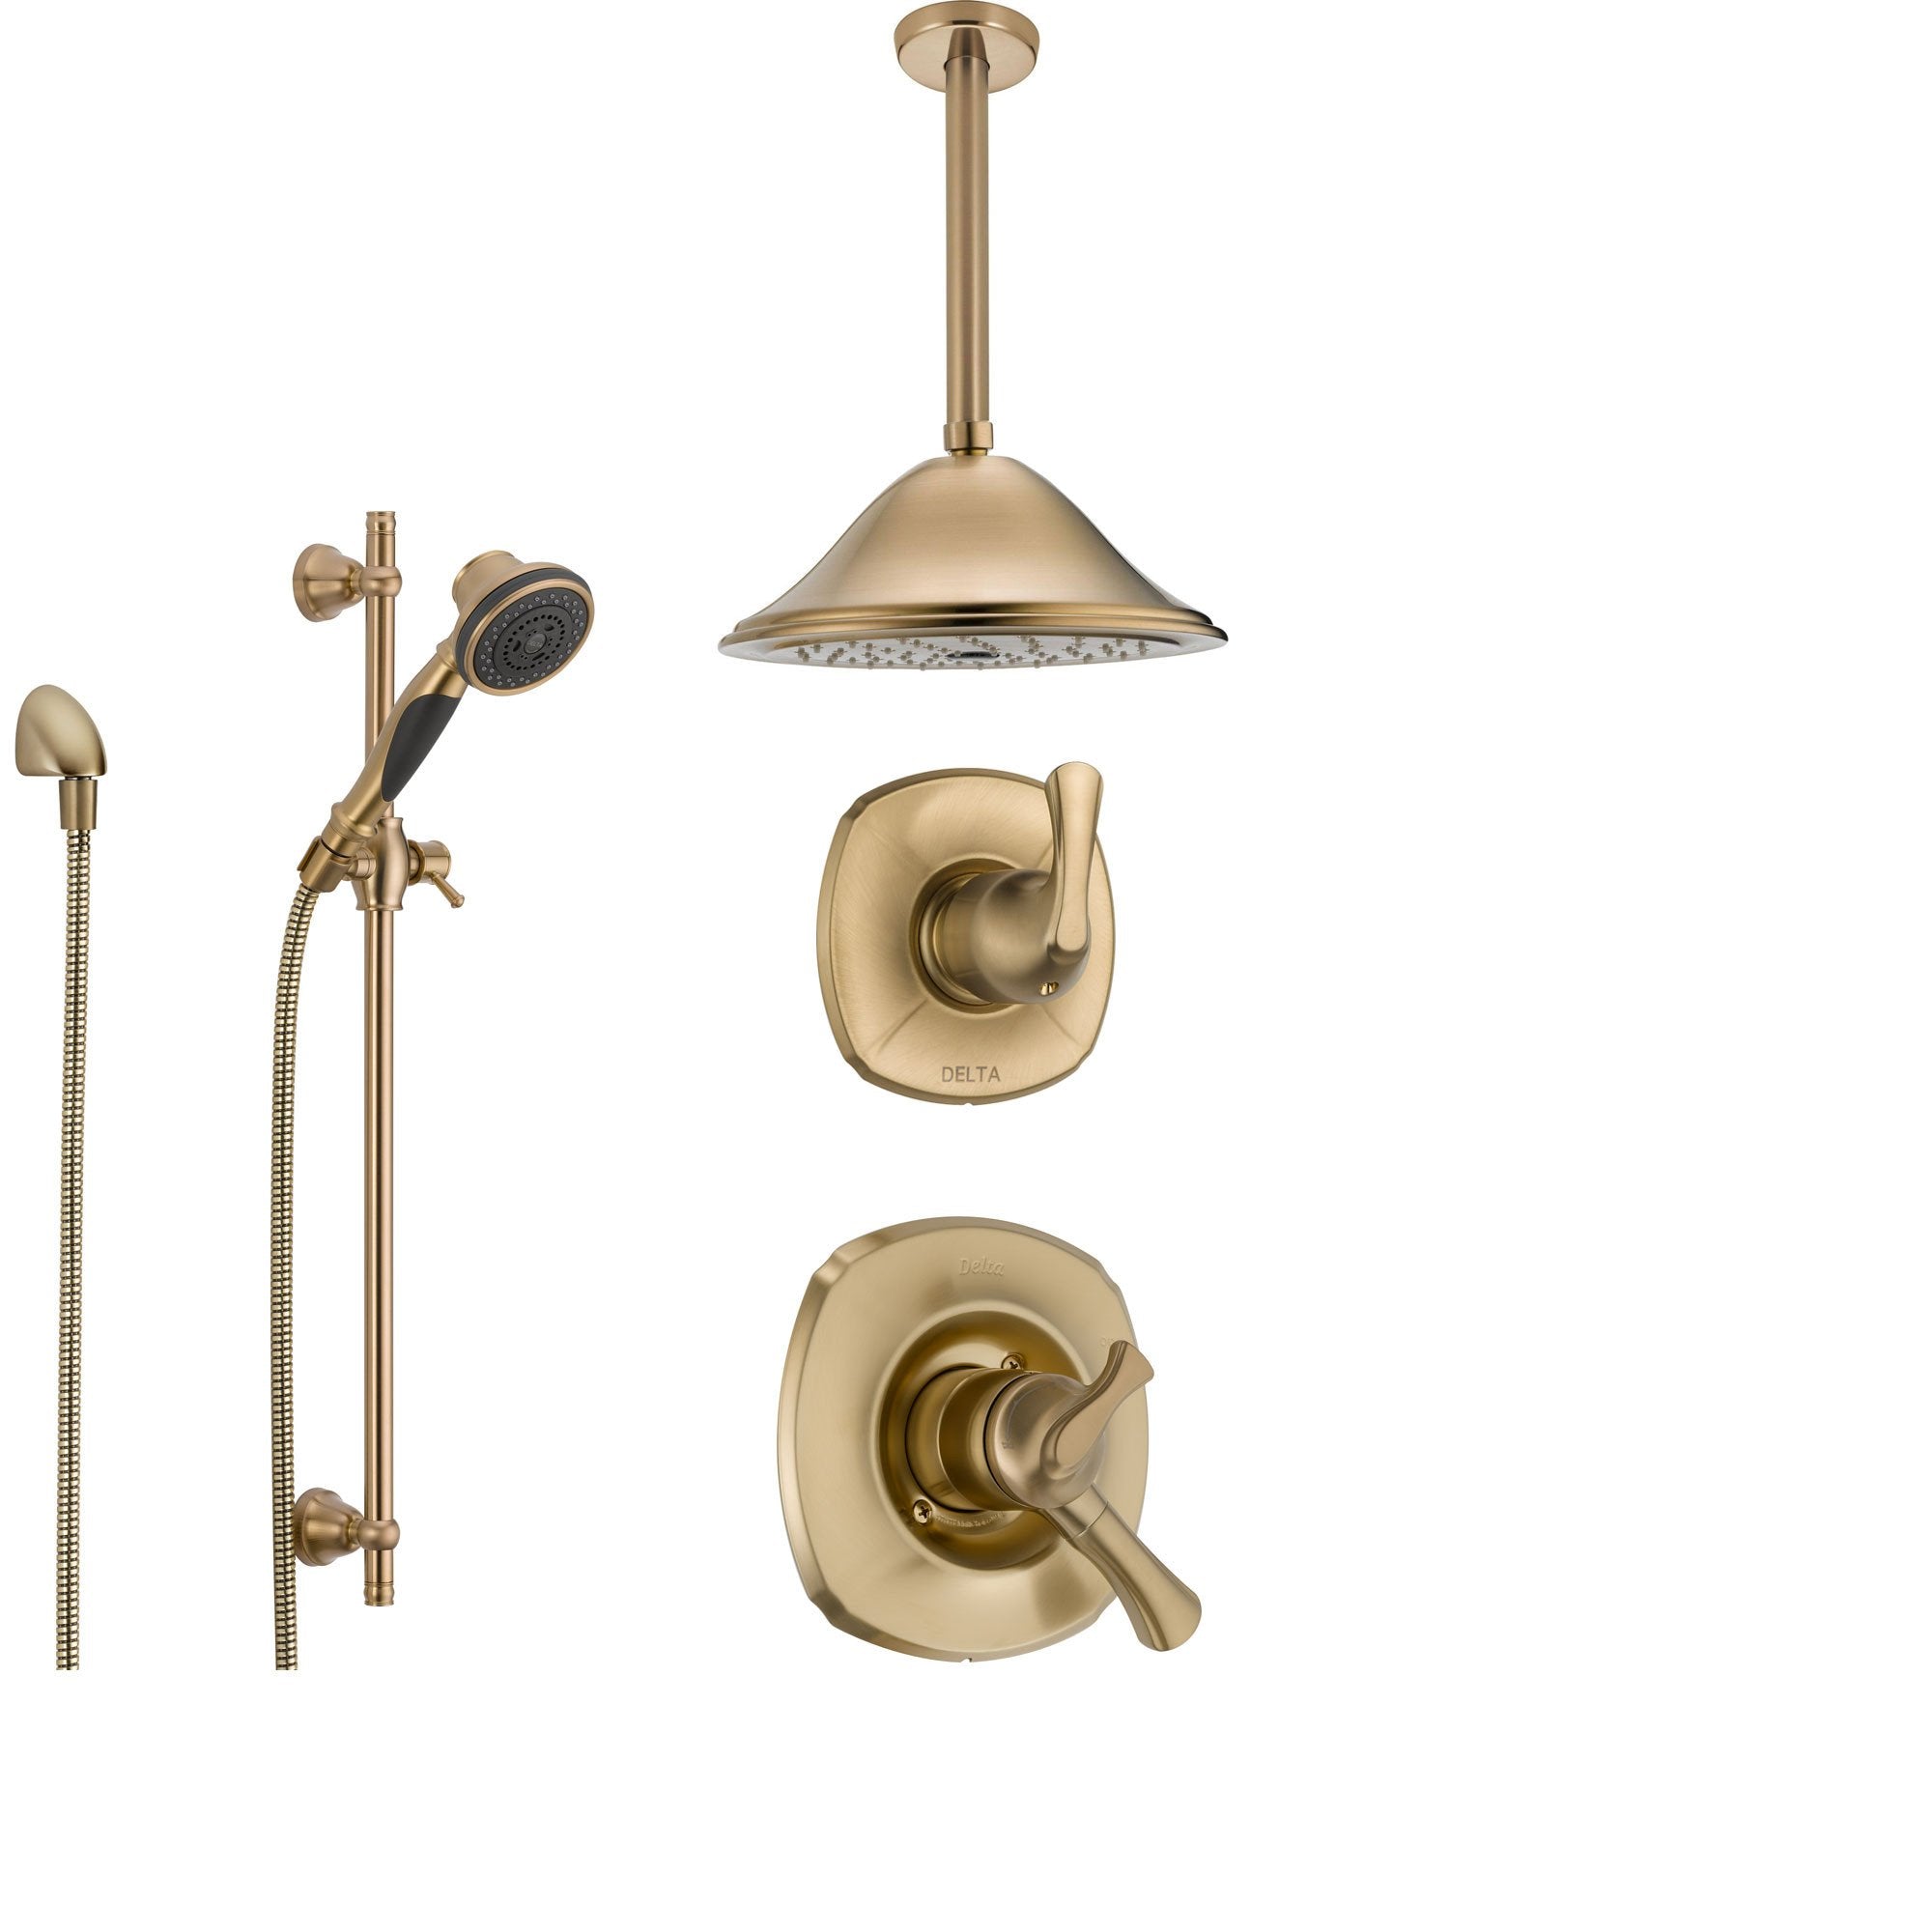 Delta Addison Champagne Bronze Shower System with Dual Control Shower Handle, 3-setting Diverter, Large Rain Ceiling Mount Showerhead, and Handheld Spray SS179282CZ